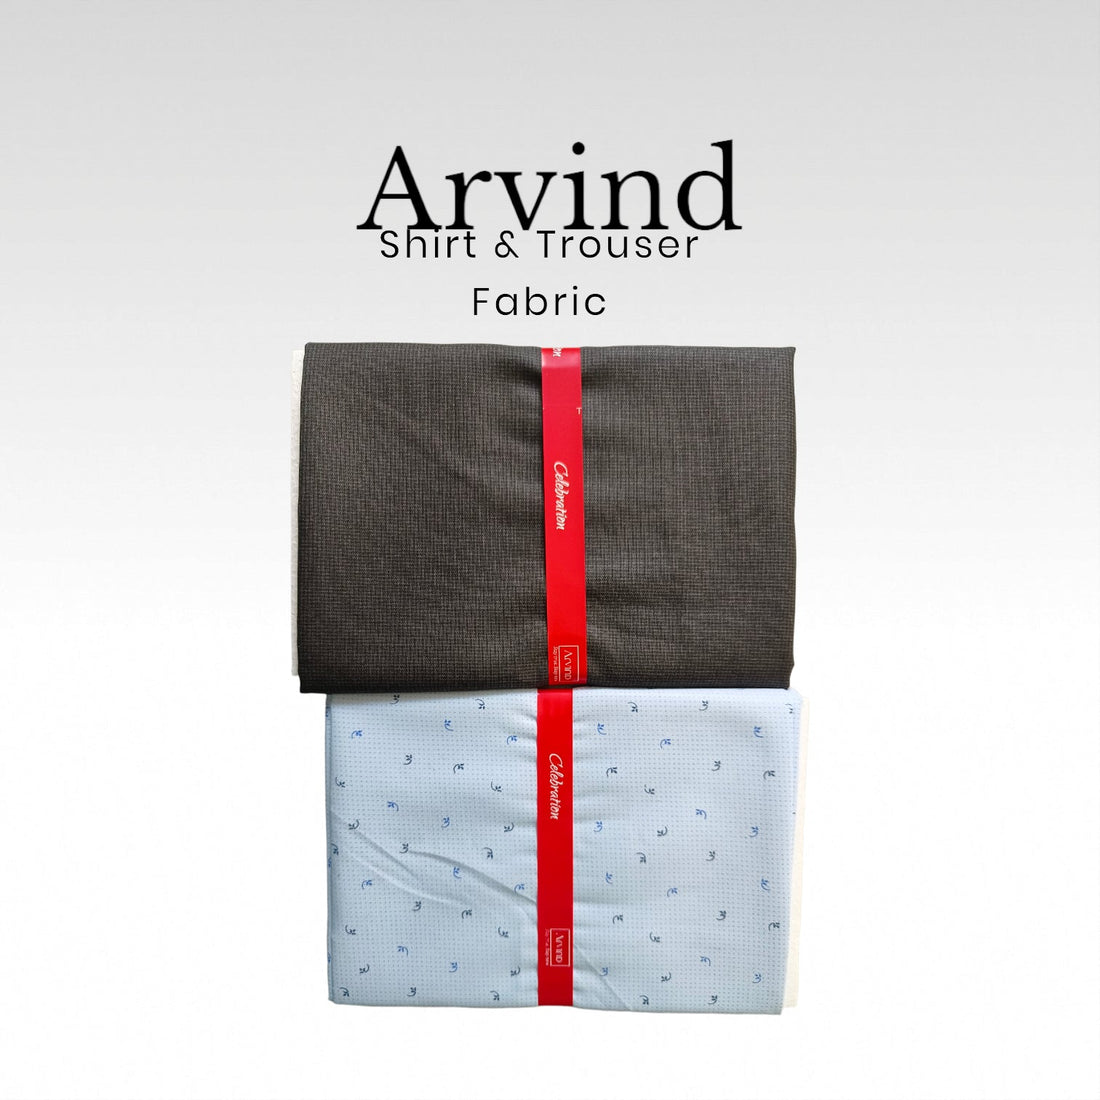 Arvind Combo: The Ultimate Solution for All Occasions